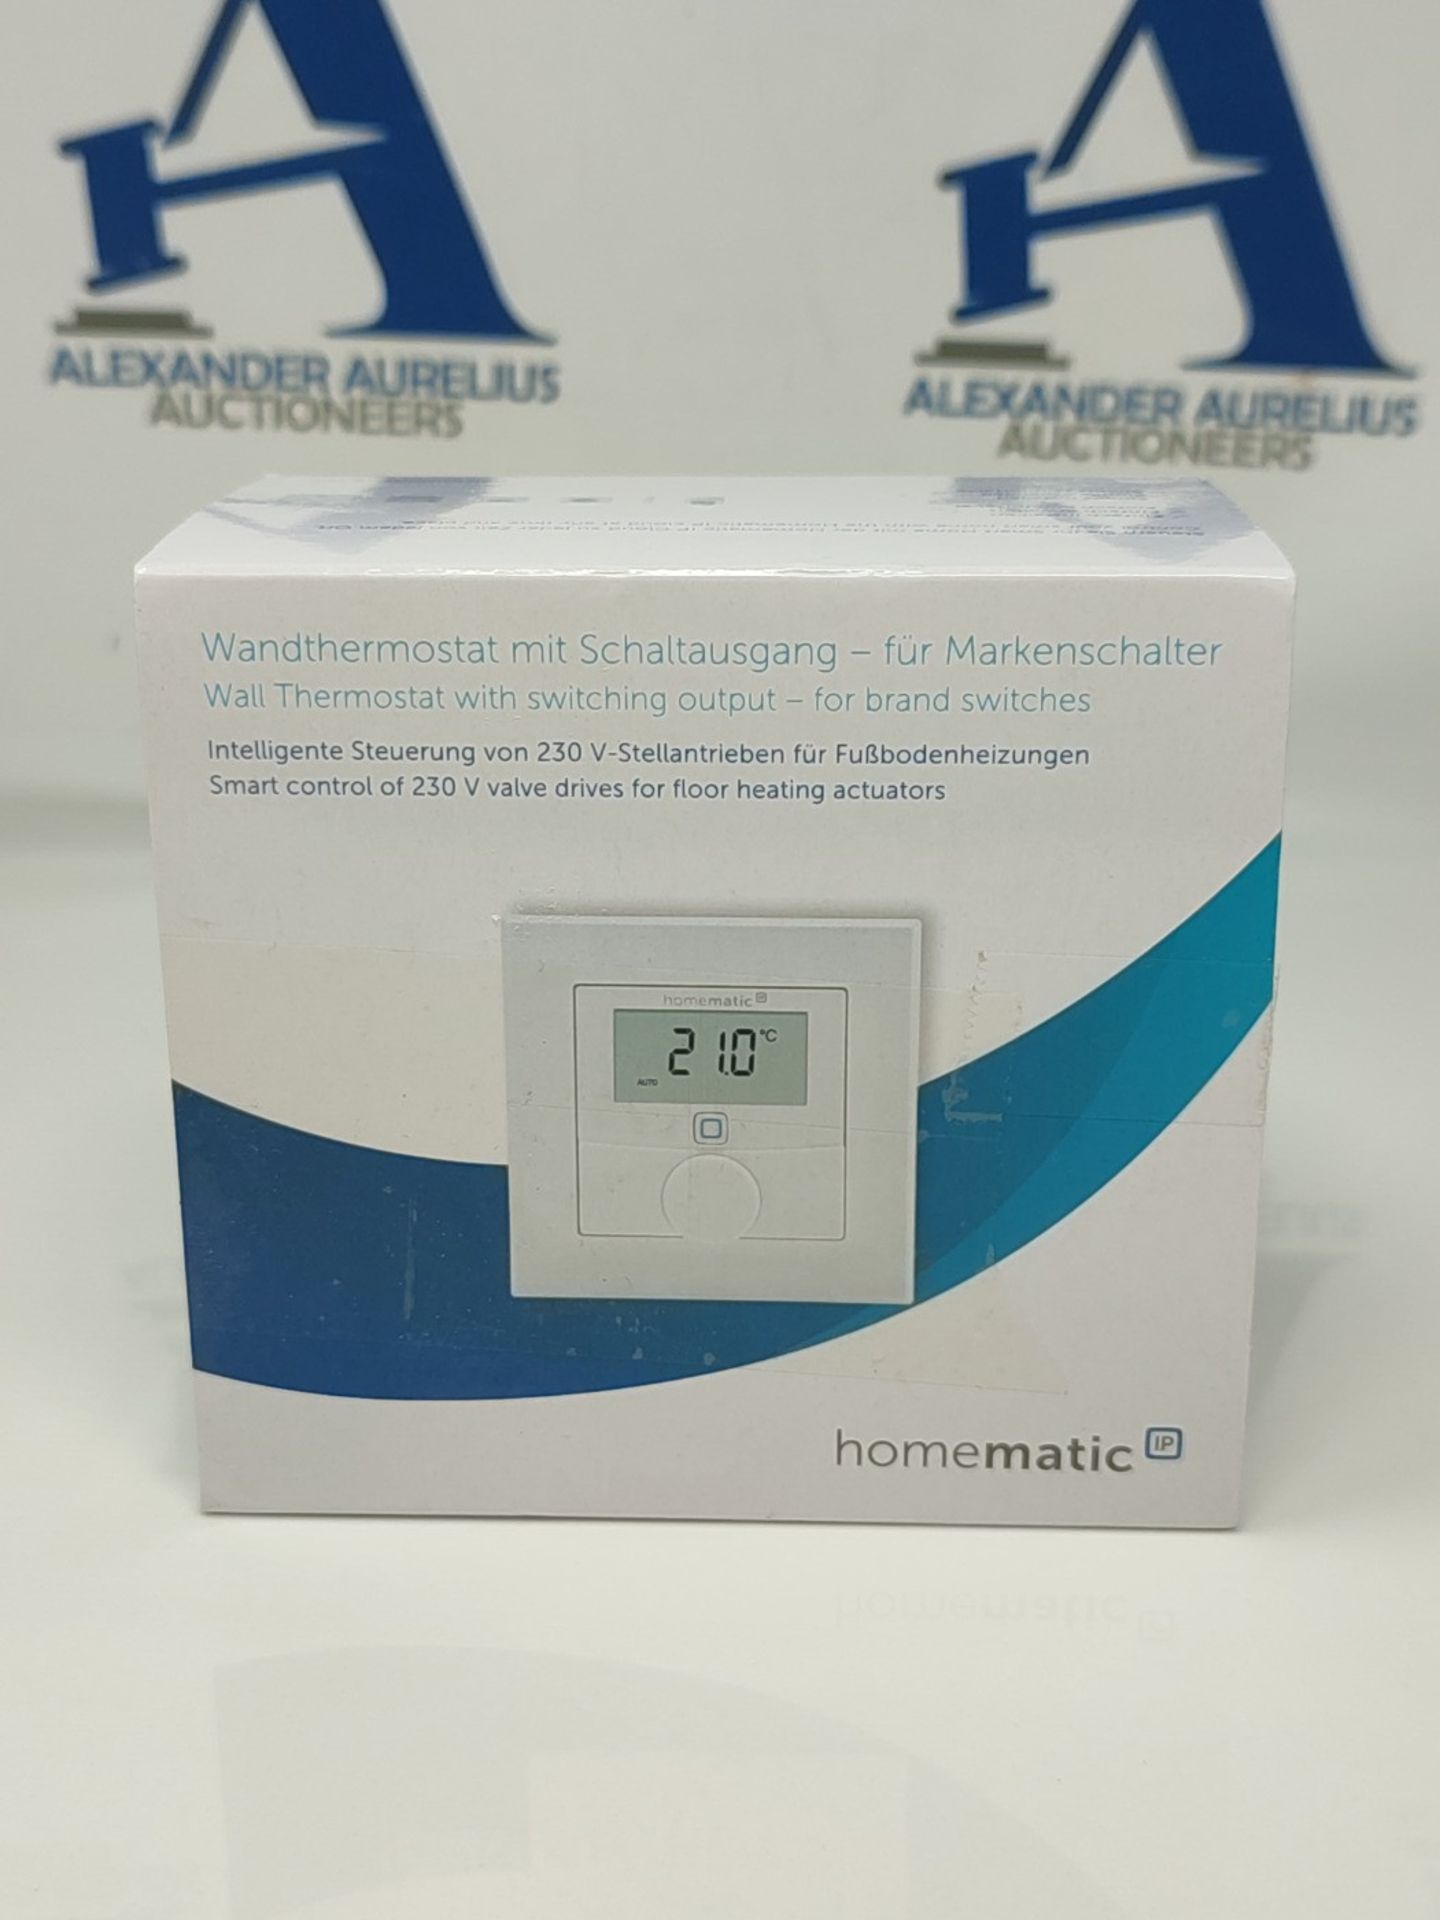 RRP £79.00 Homematic IP Smart Home Wall Thermostat with Switched Output - for branded switches, d - Image 2 of 3